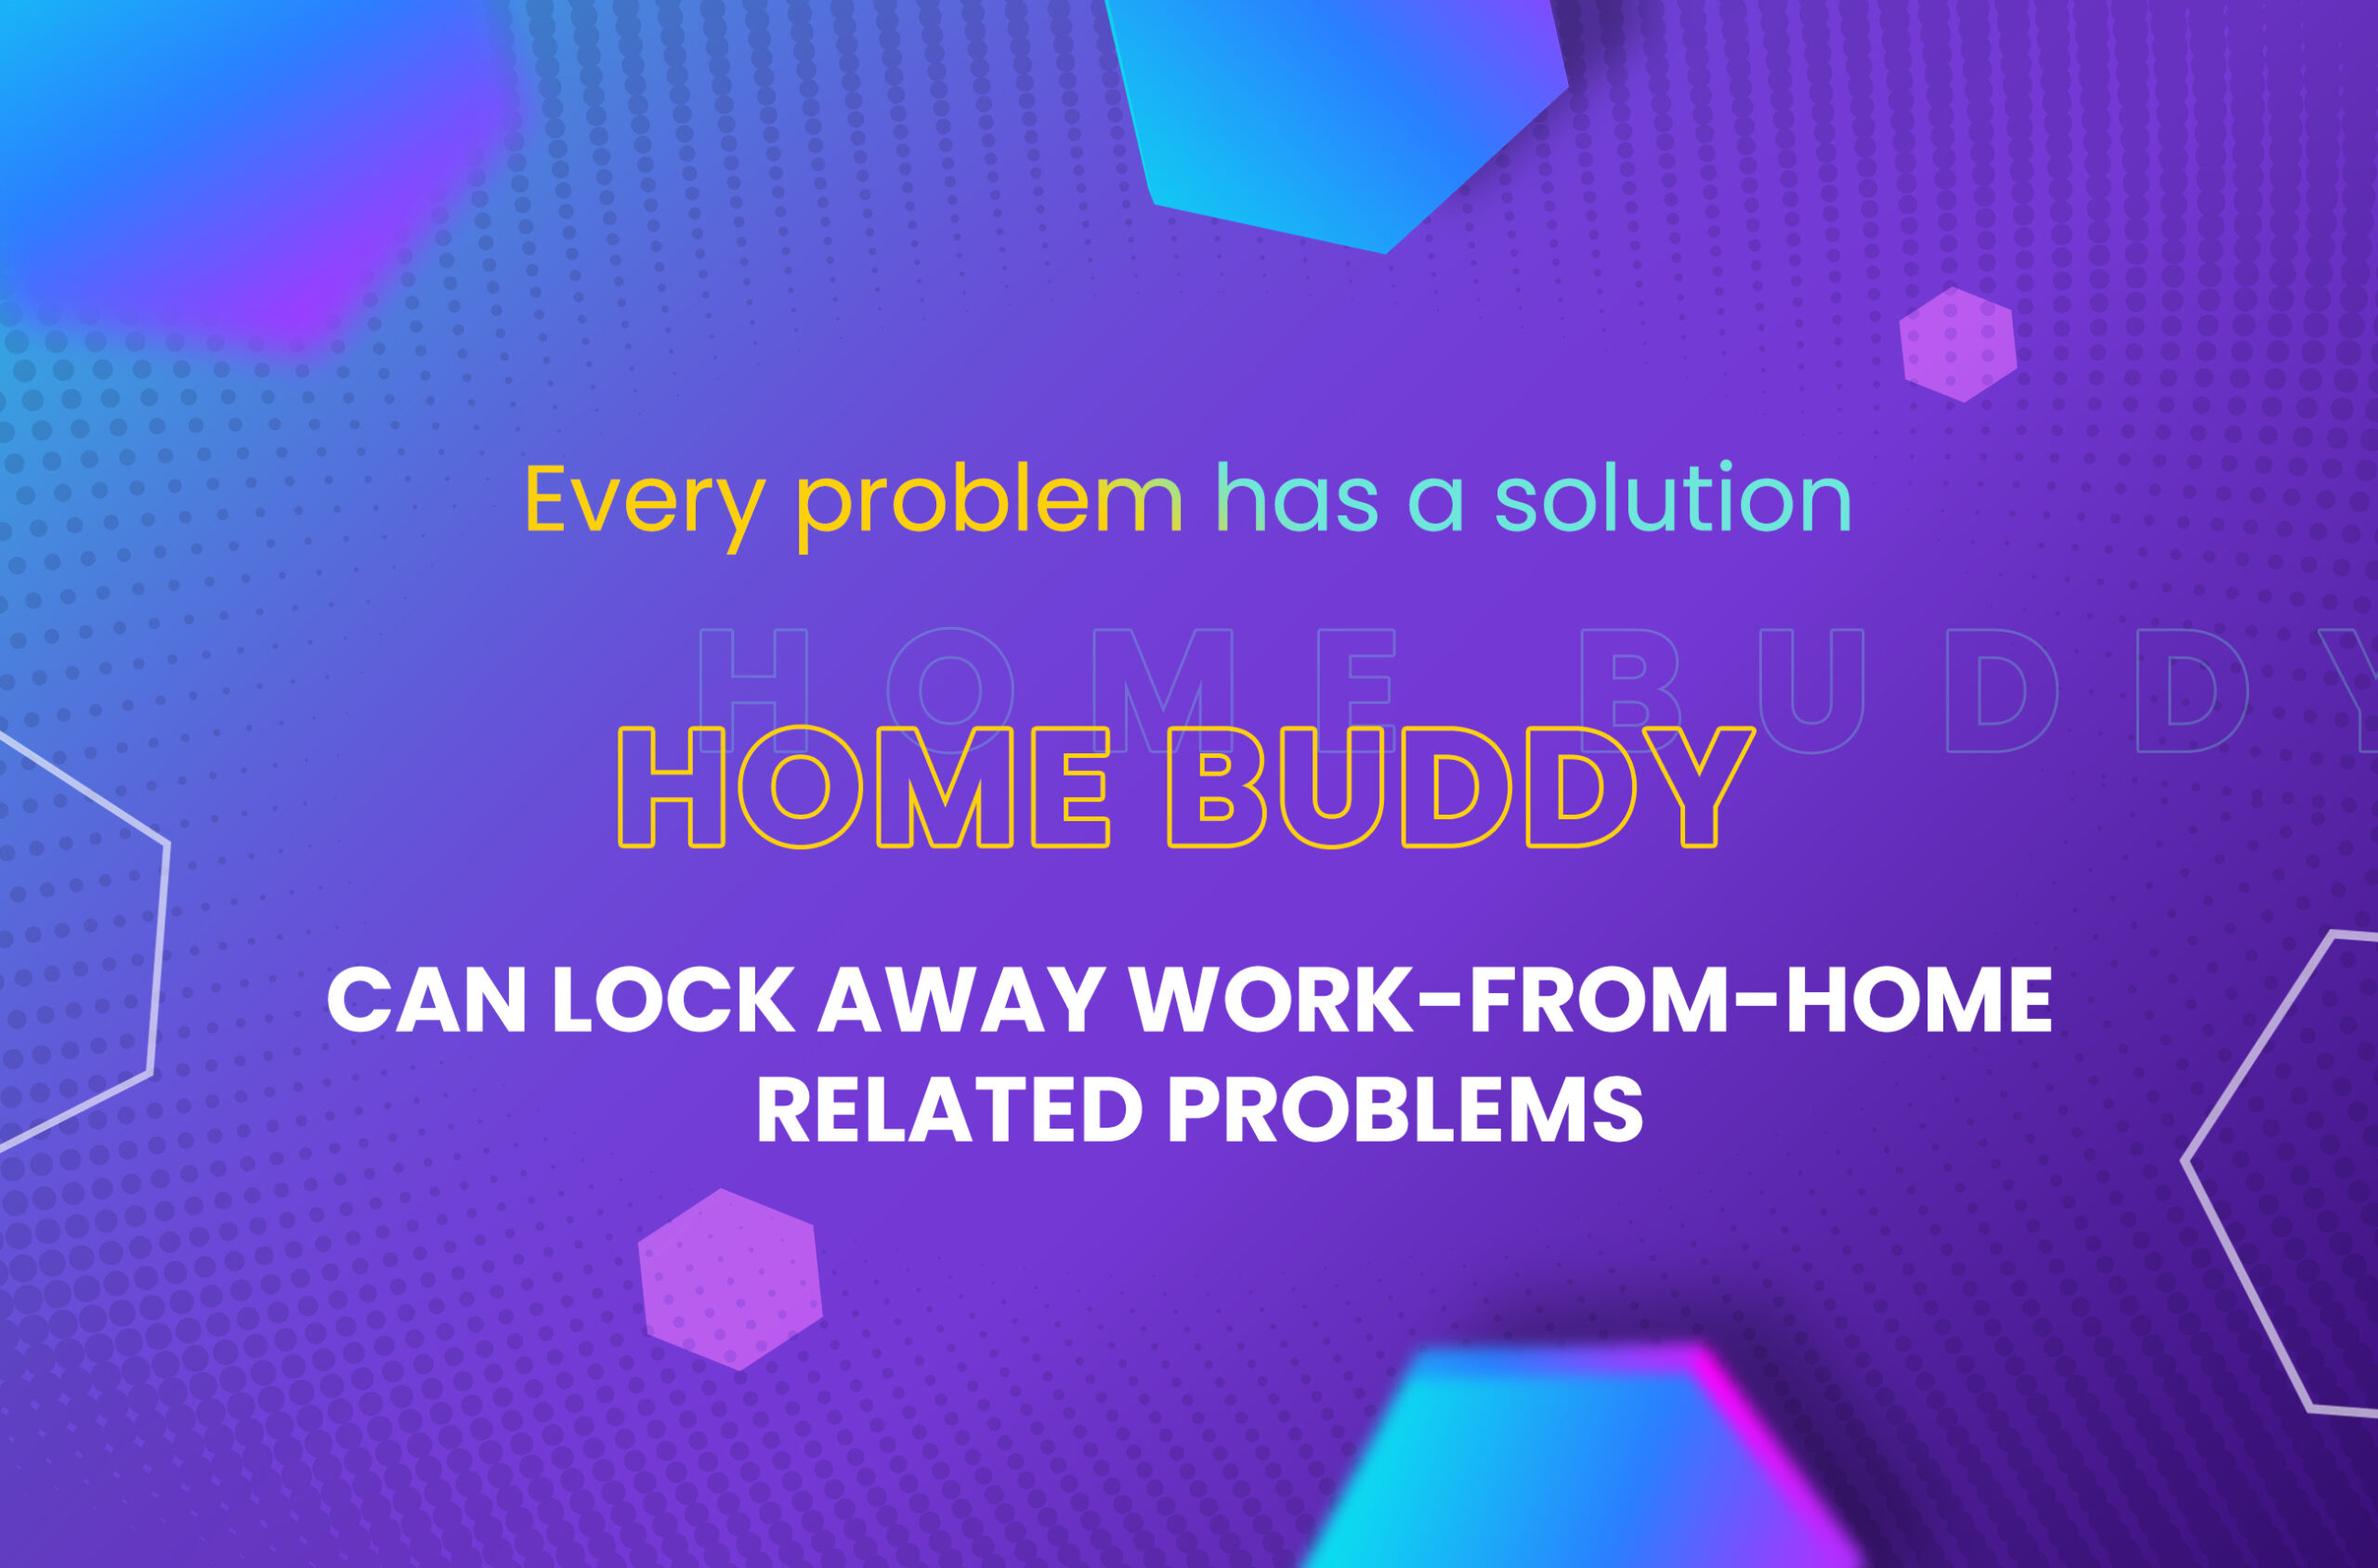 What is a Home Buddy - Smart Door Lock System? What does it do?